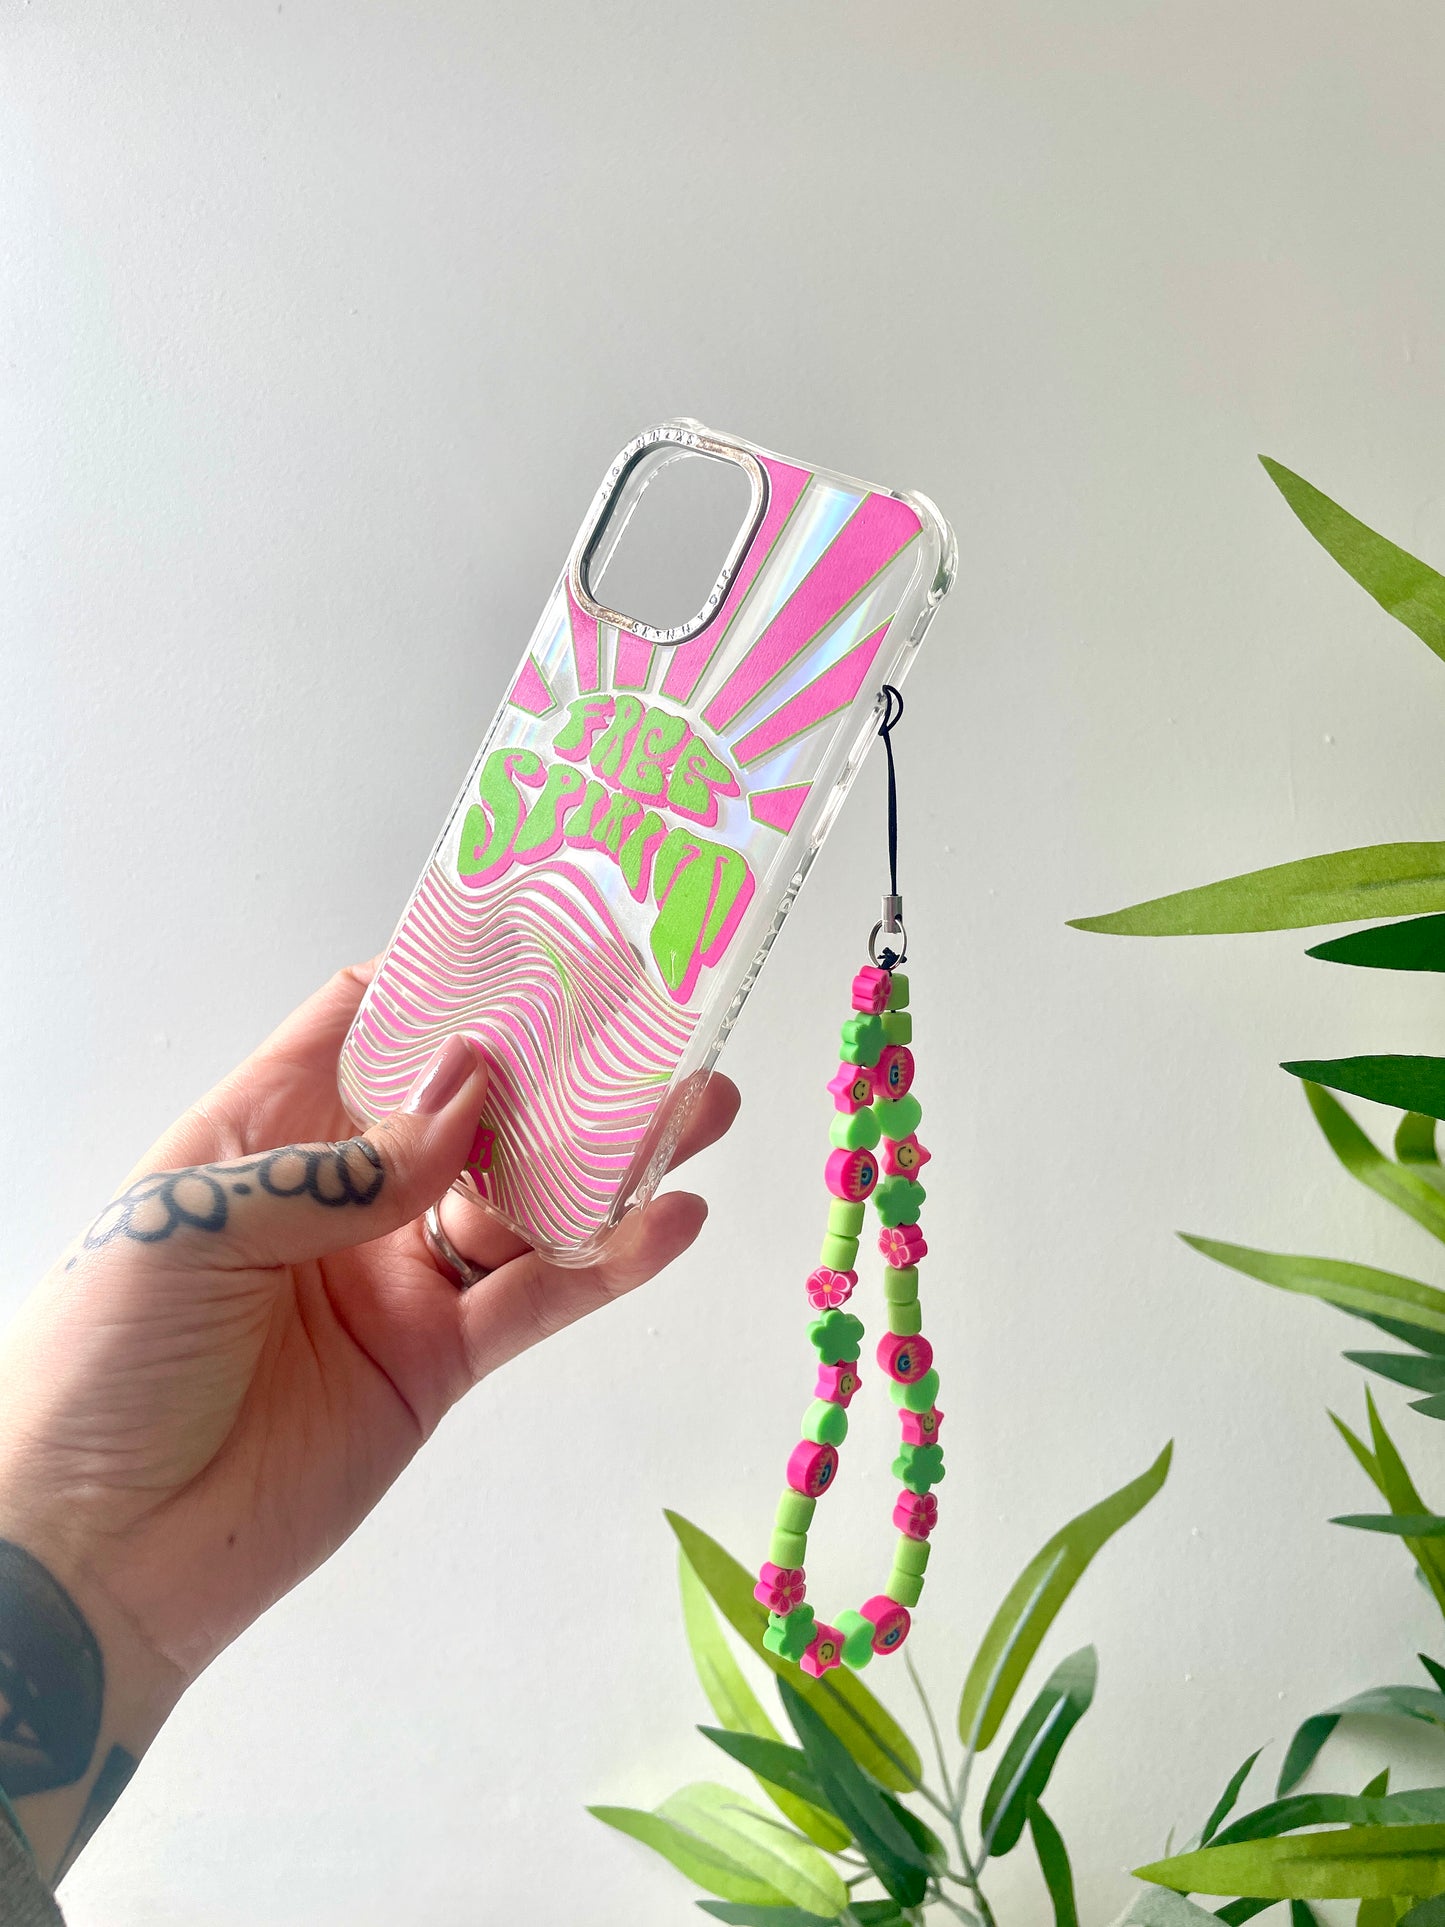 BUBA GOODS x SKINNYDIP limited edition green and pink mobile phone charm strap